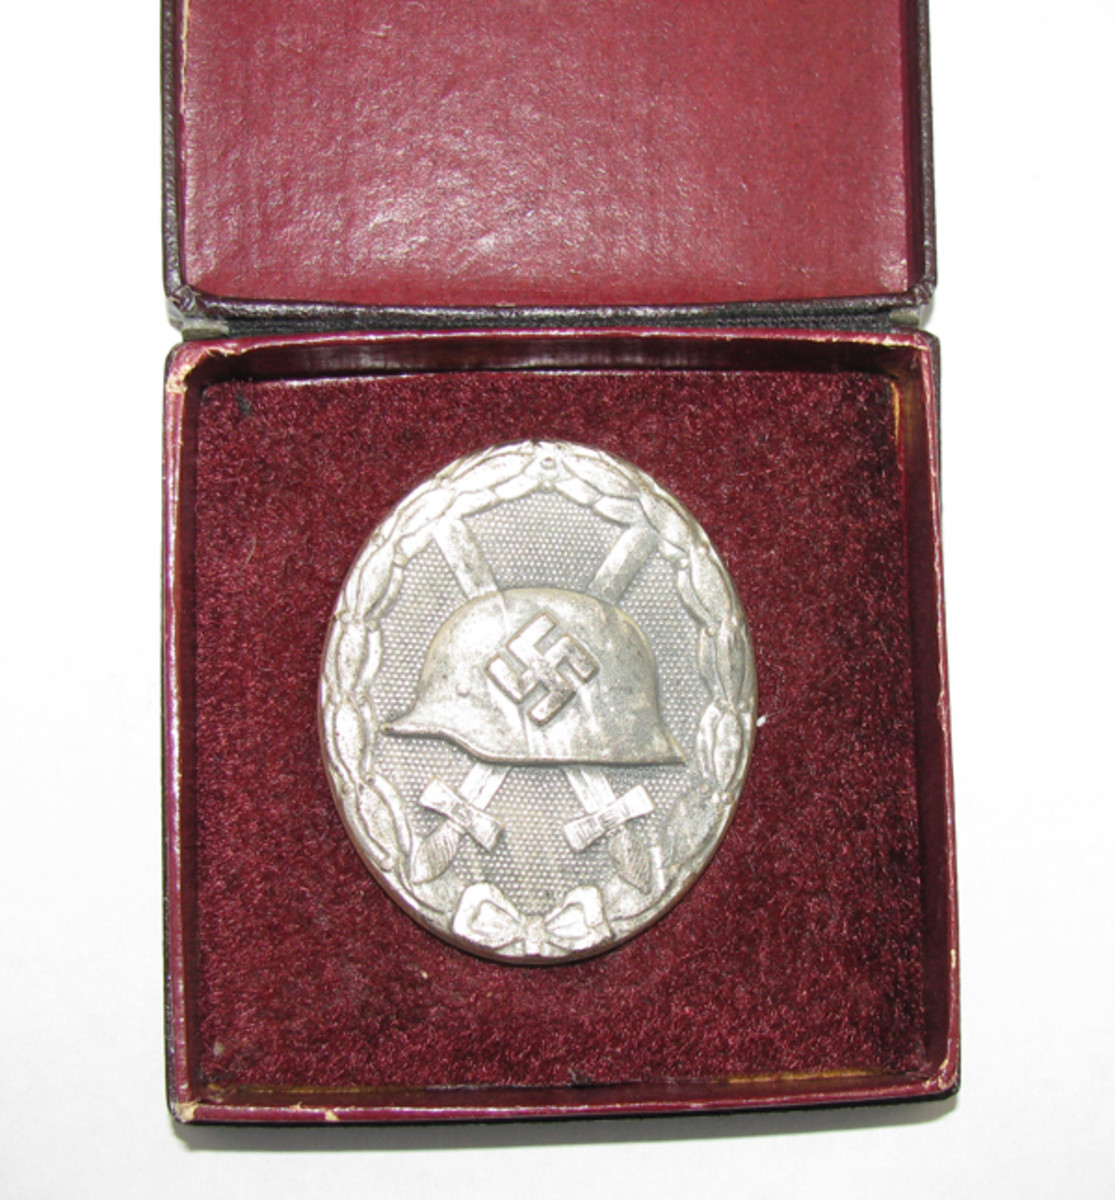 Silver and gold wound badges typically came in lined boxes.